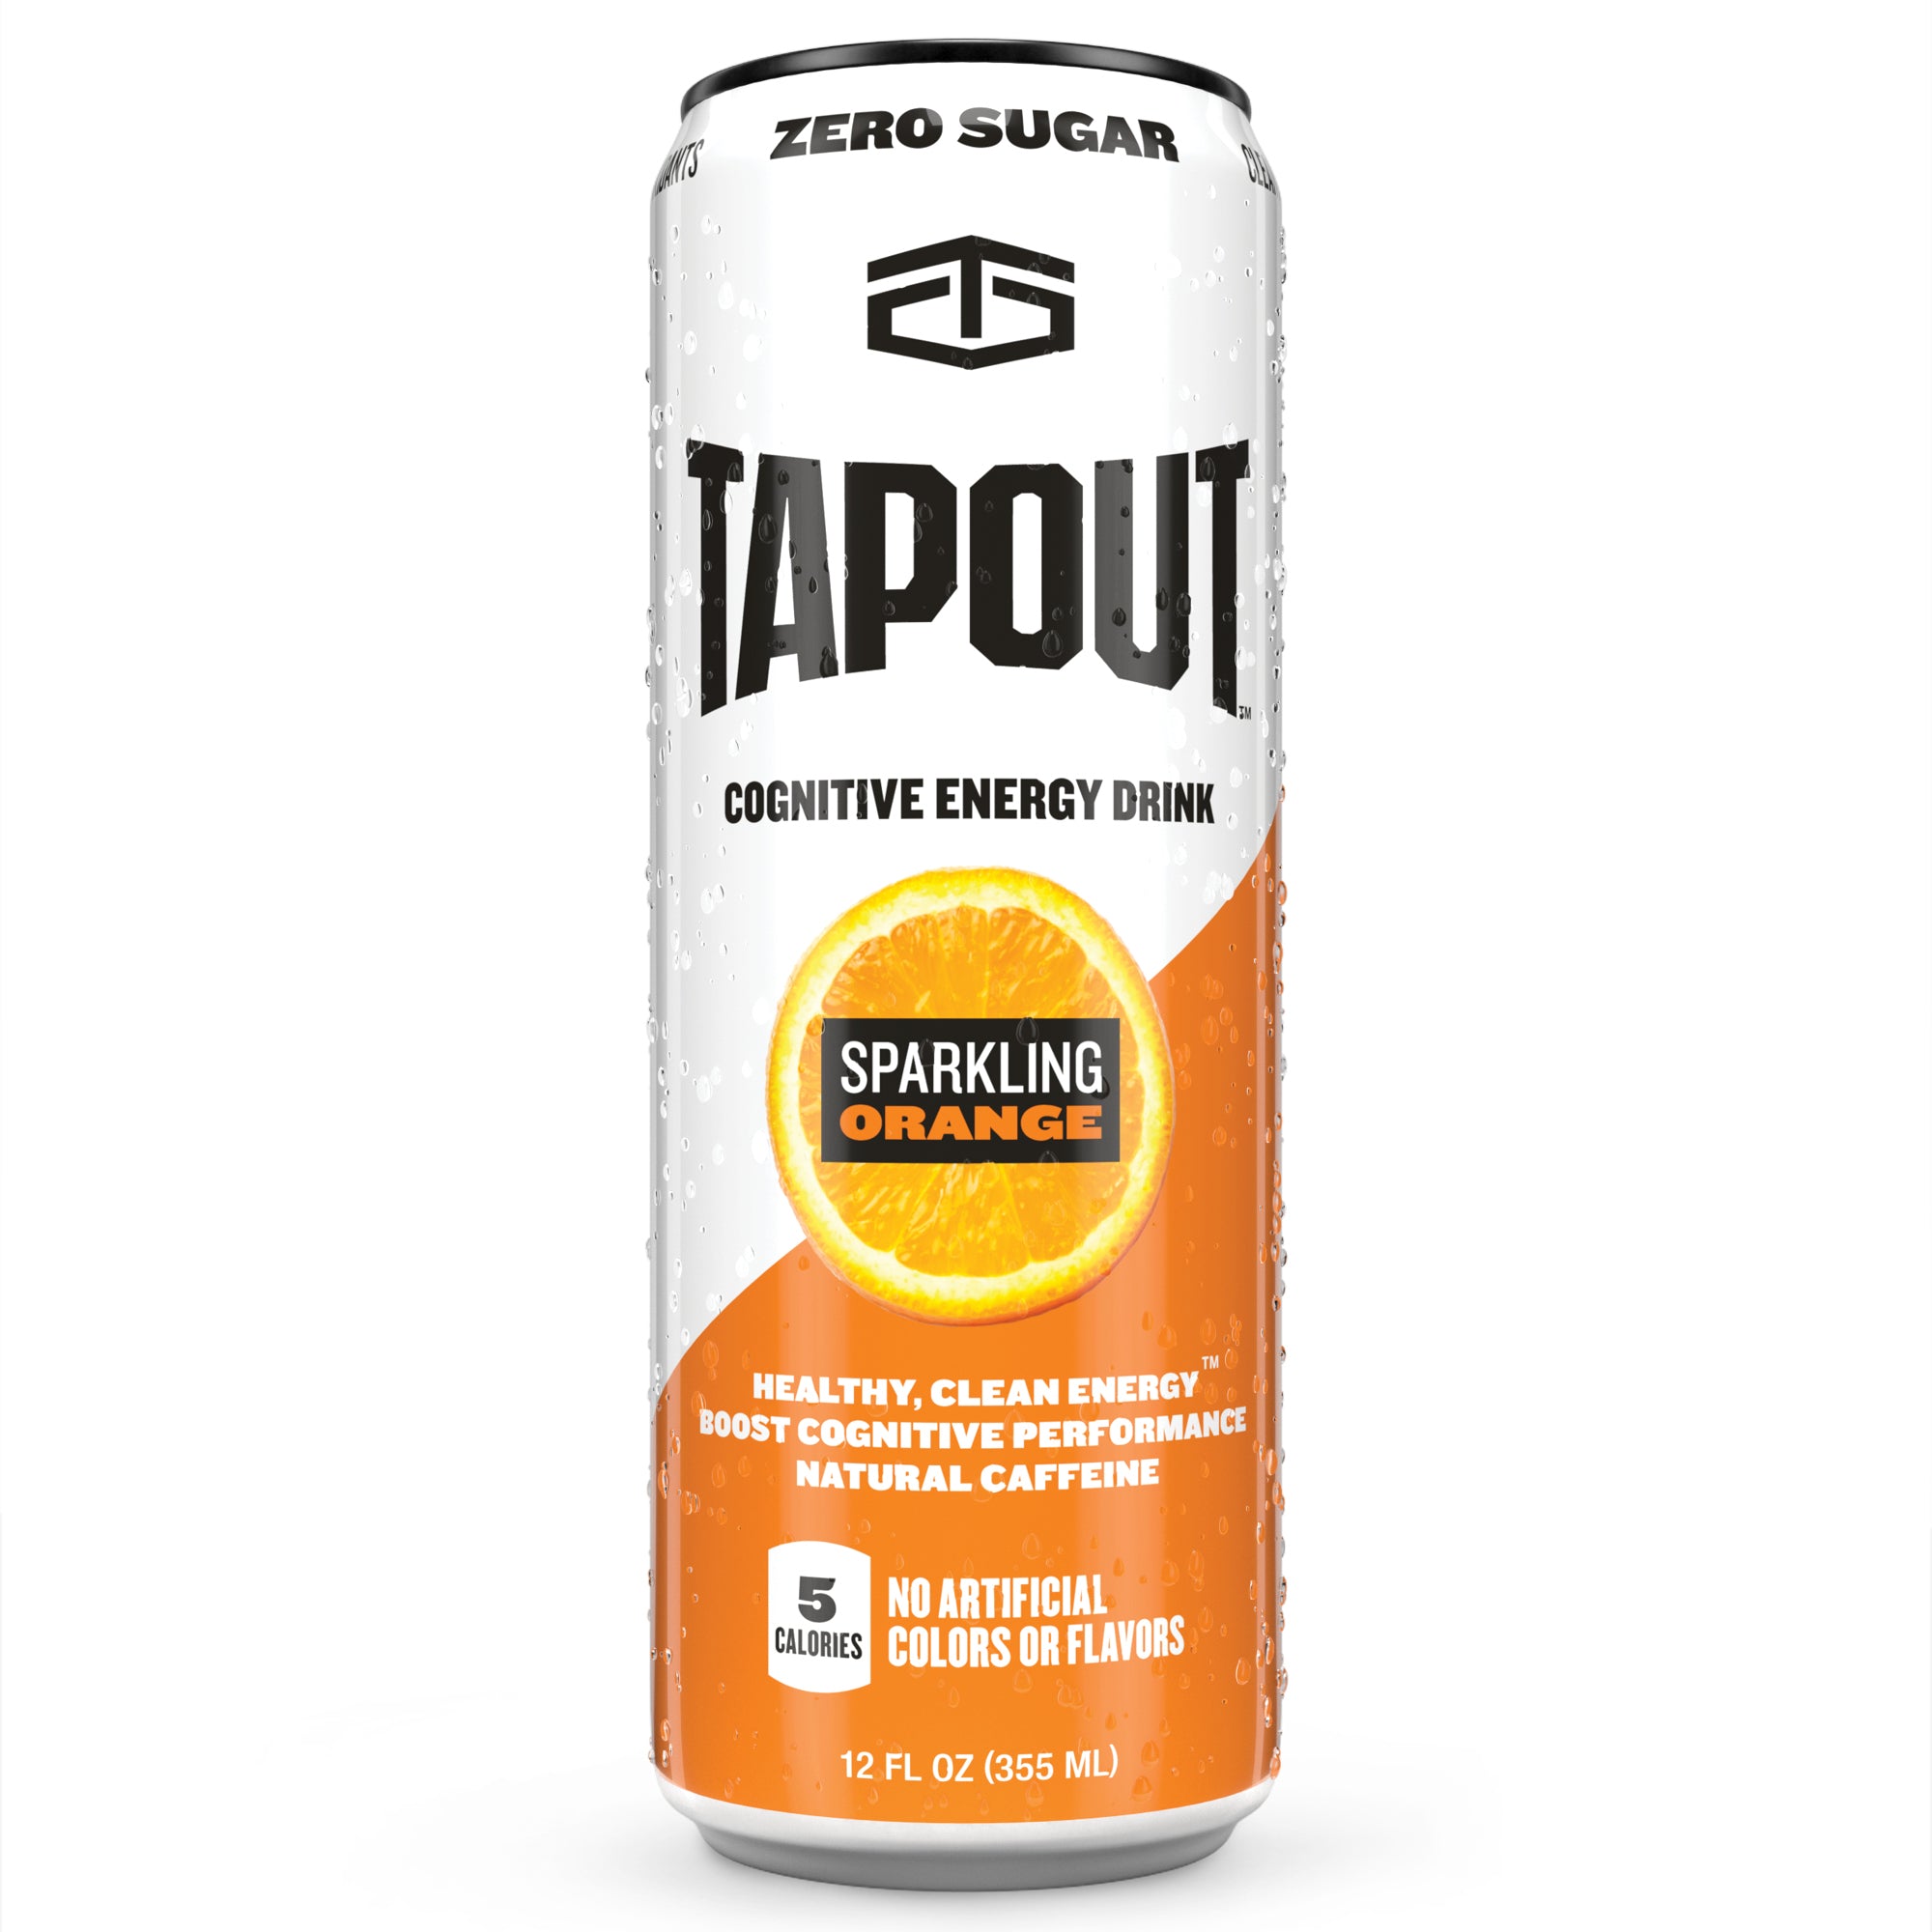 TapouT - Cognitive Energy Drink with Zero Sugar 12oz (12 Pack)